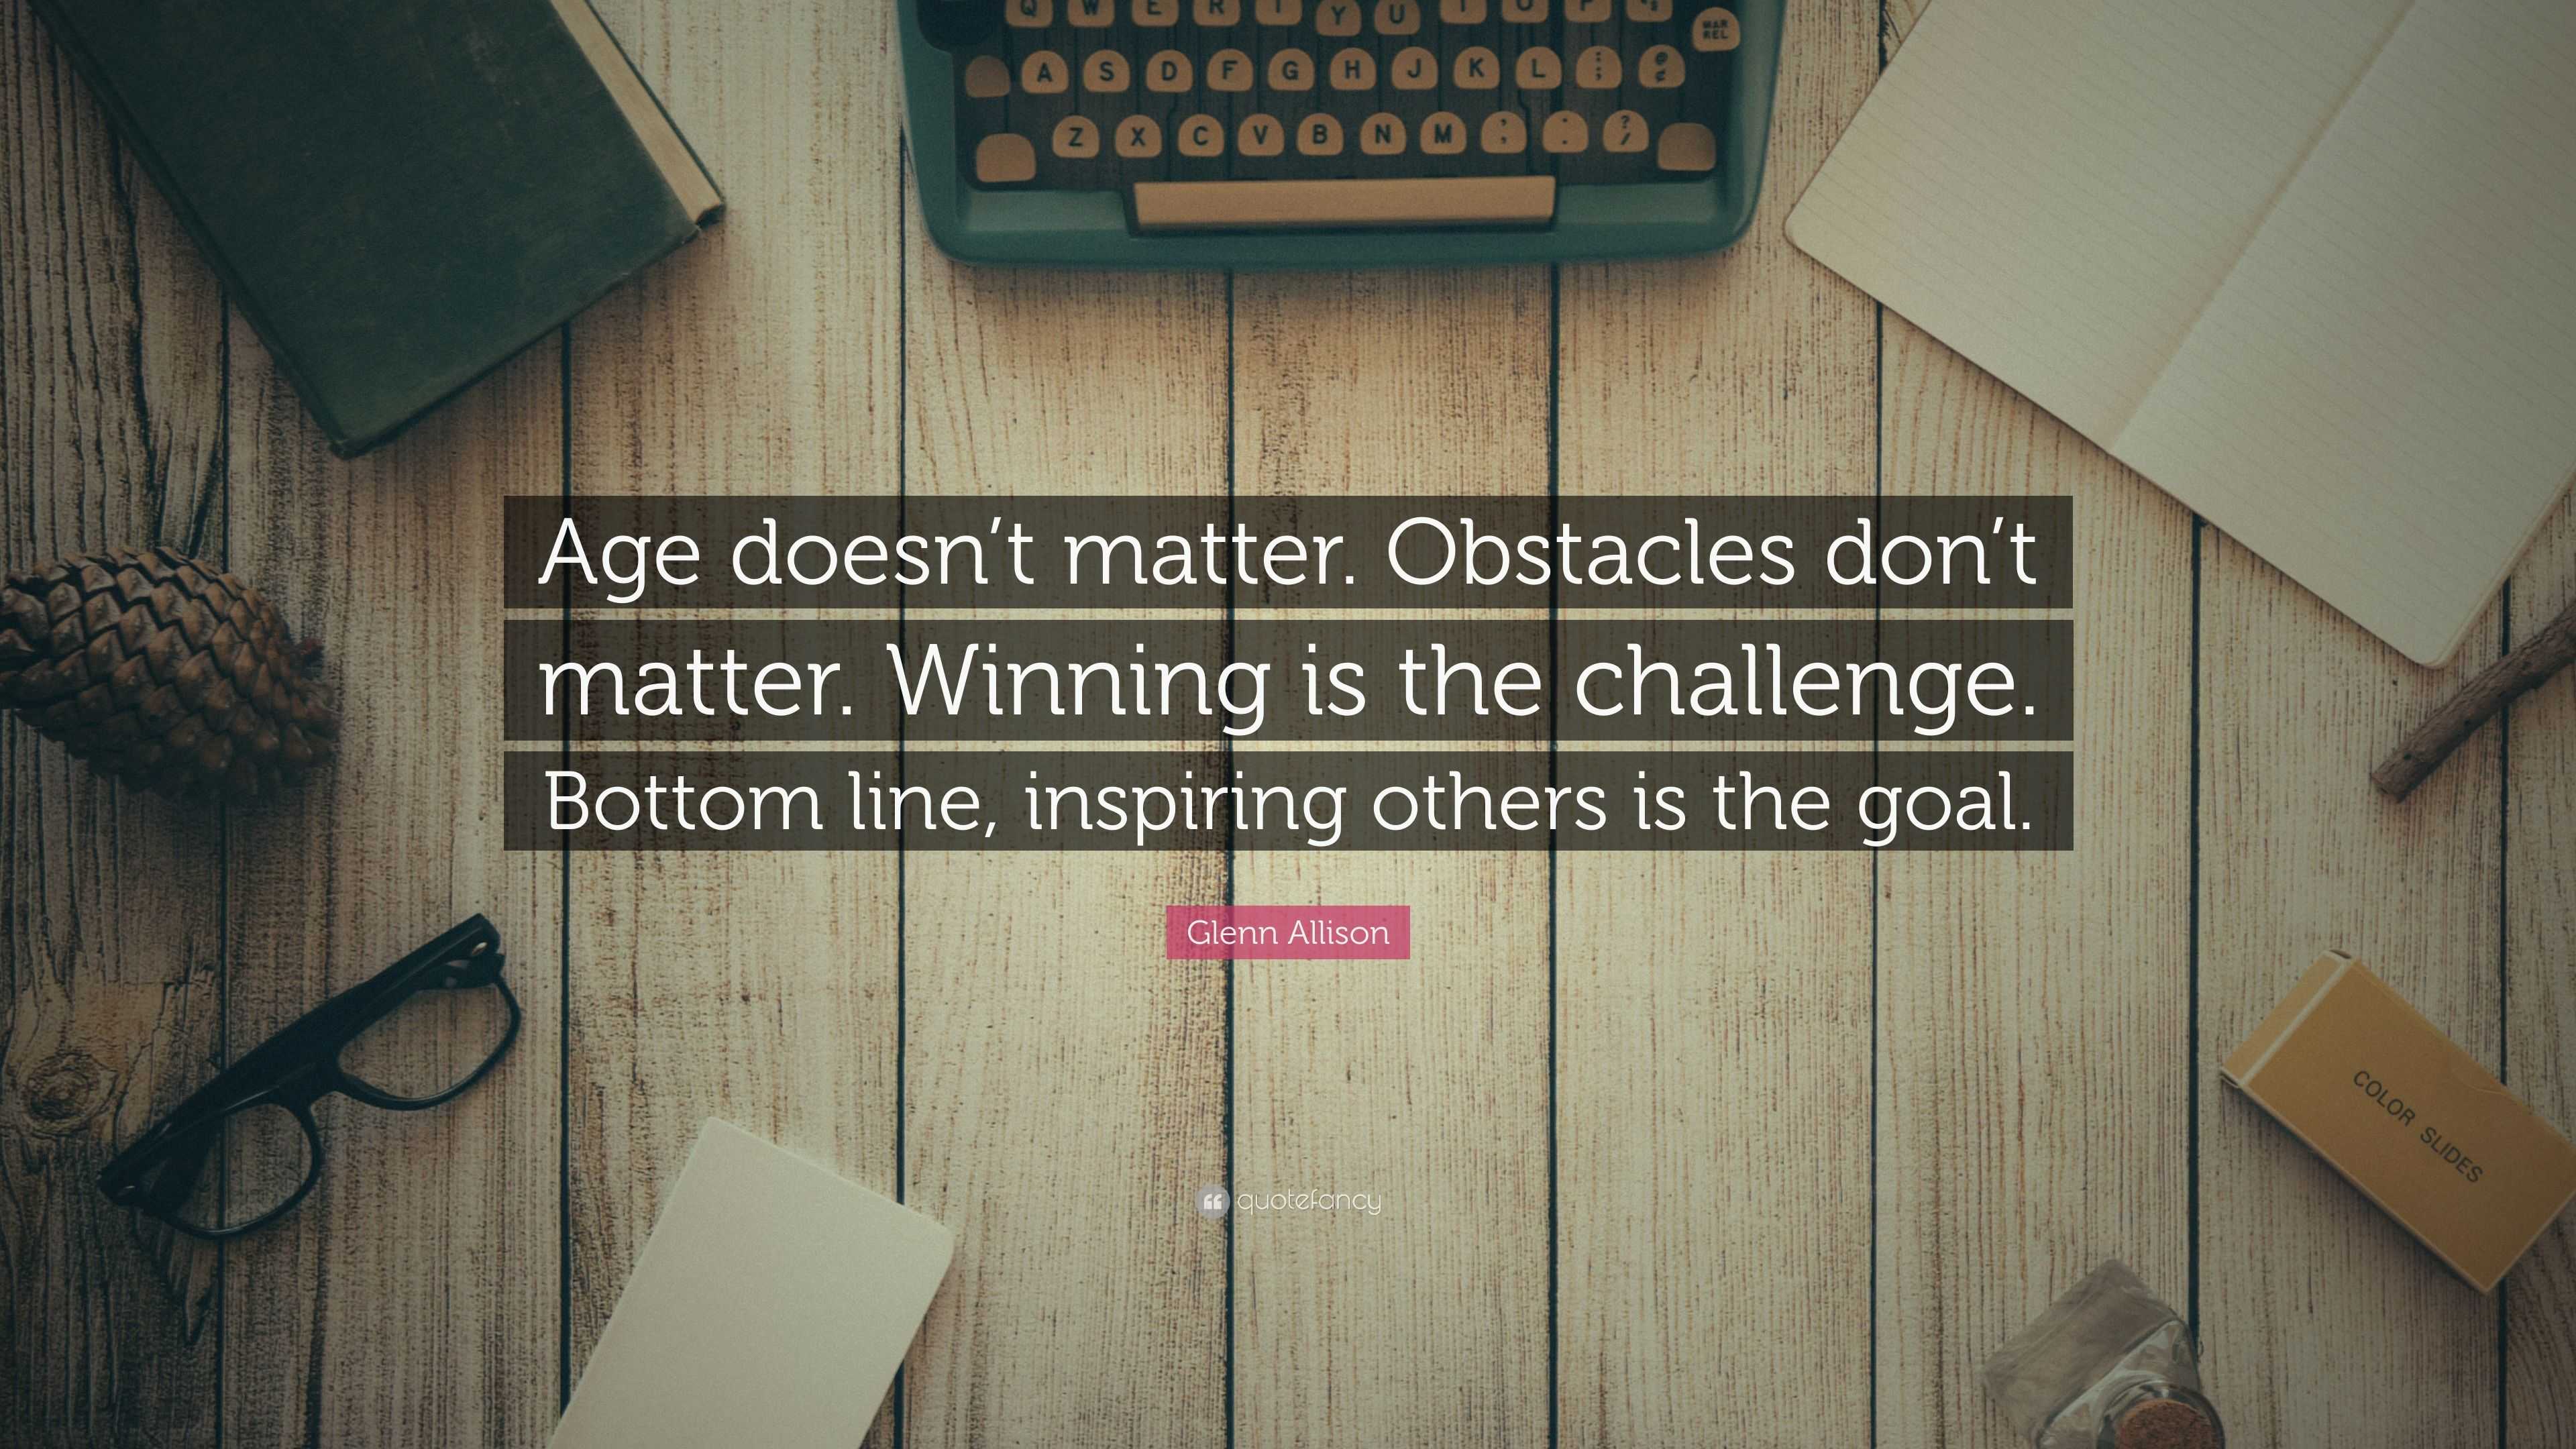 Glenn Allison Quote: “Age doesn't matter. Obstacles don't matter. Winning  is the challenge. Bottom